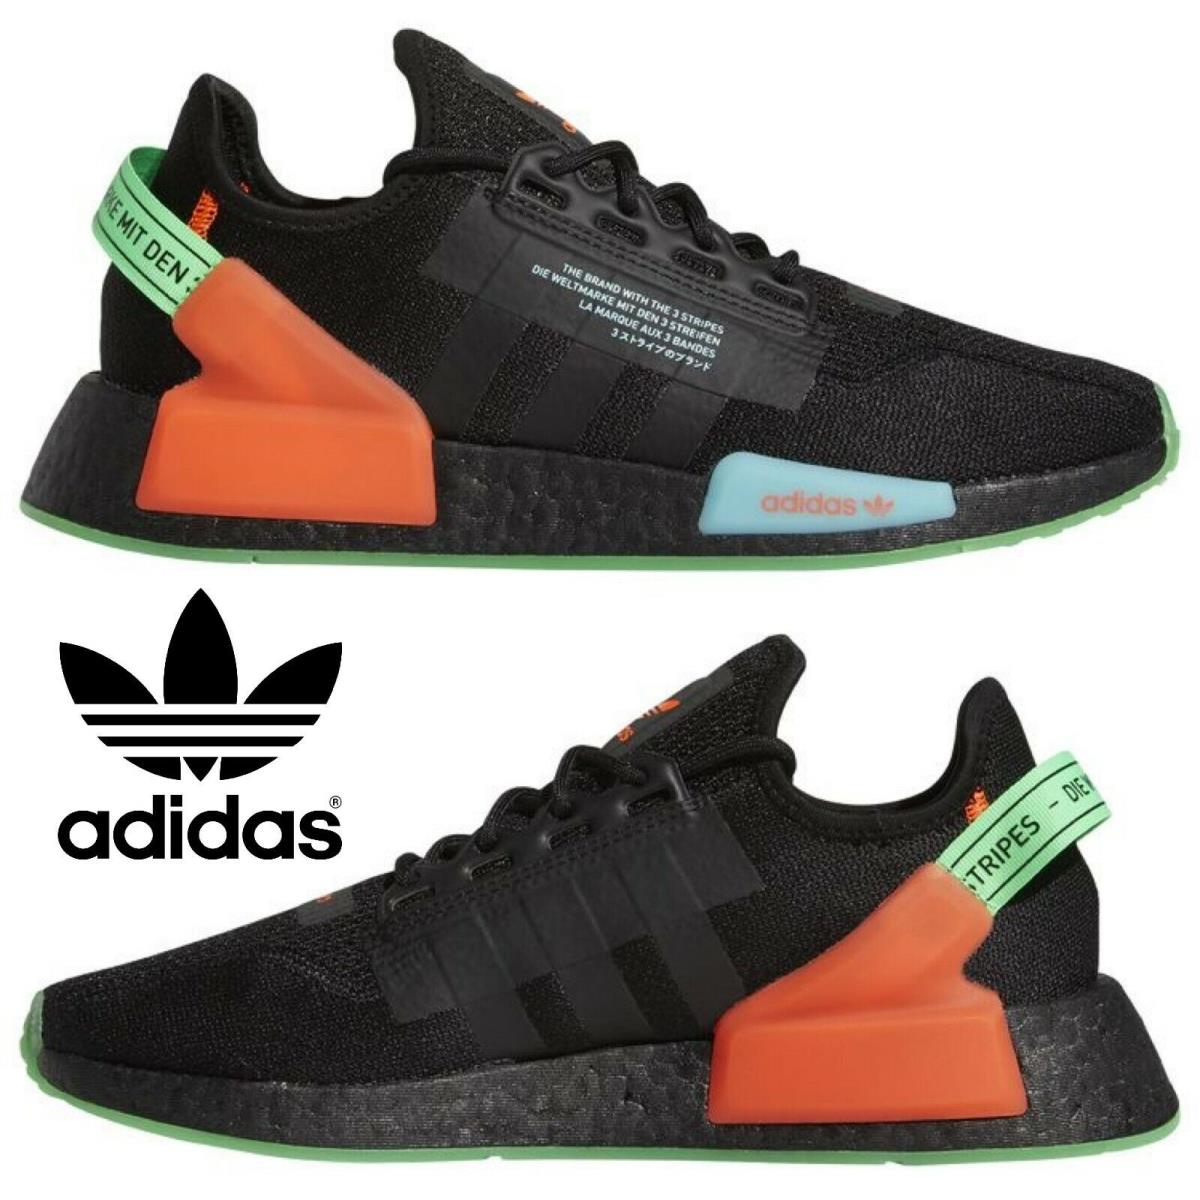 Adidas Originals Nmd R1 V2 Men`s Sneakers Running Shoes Gym Casual Sport Black